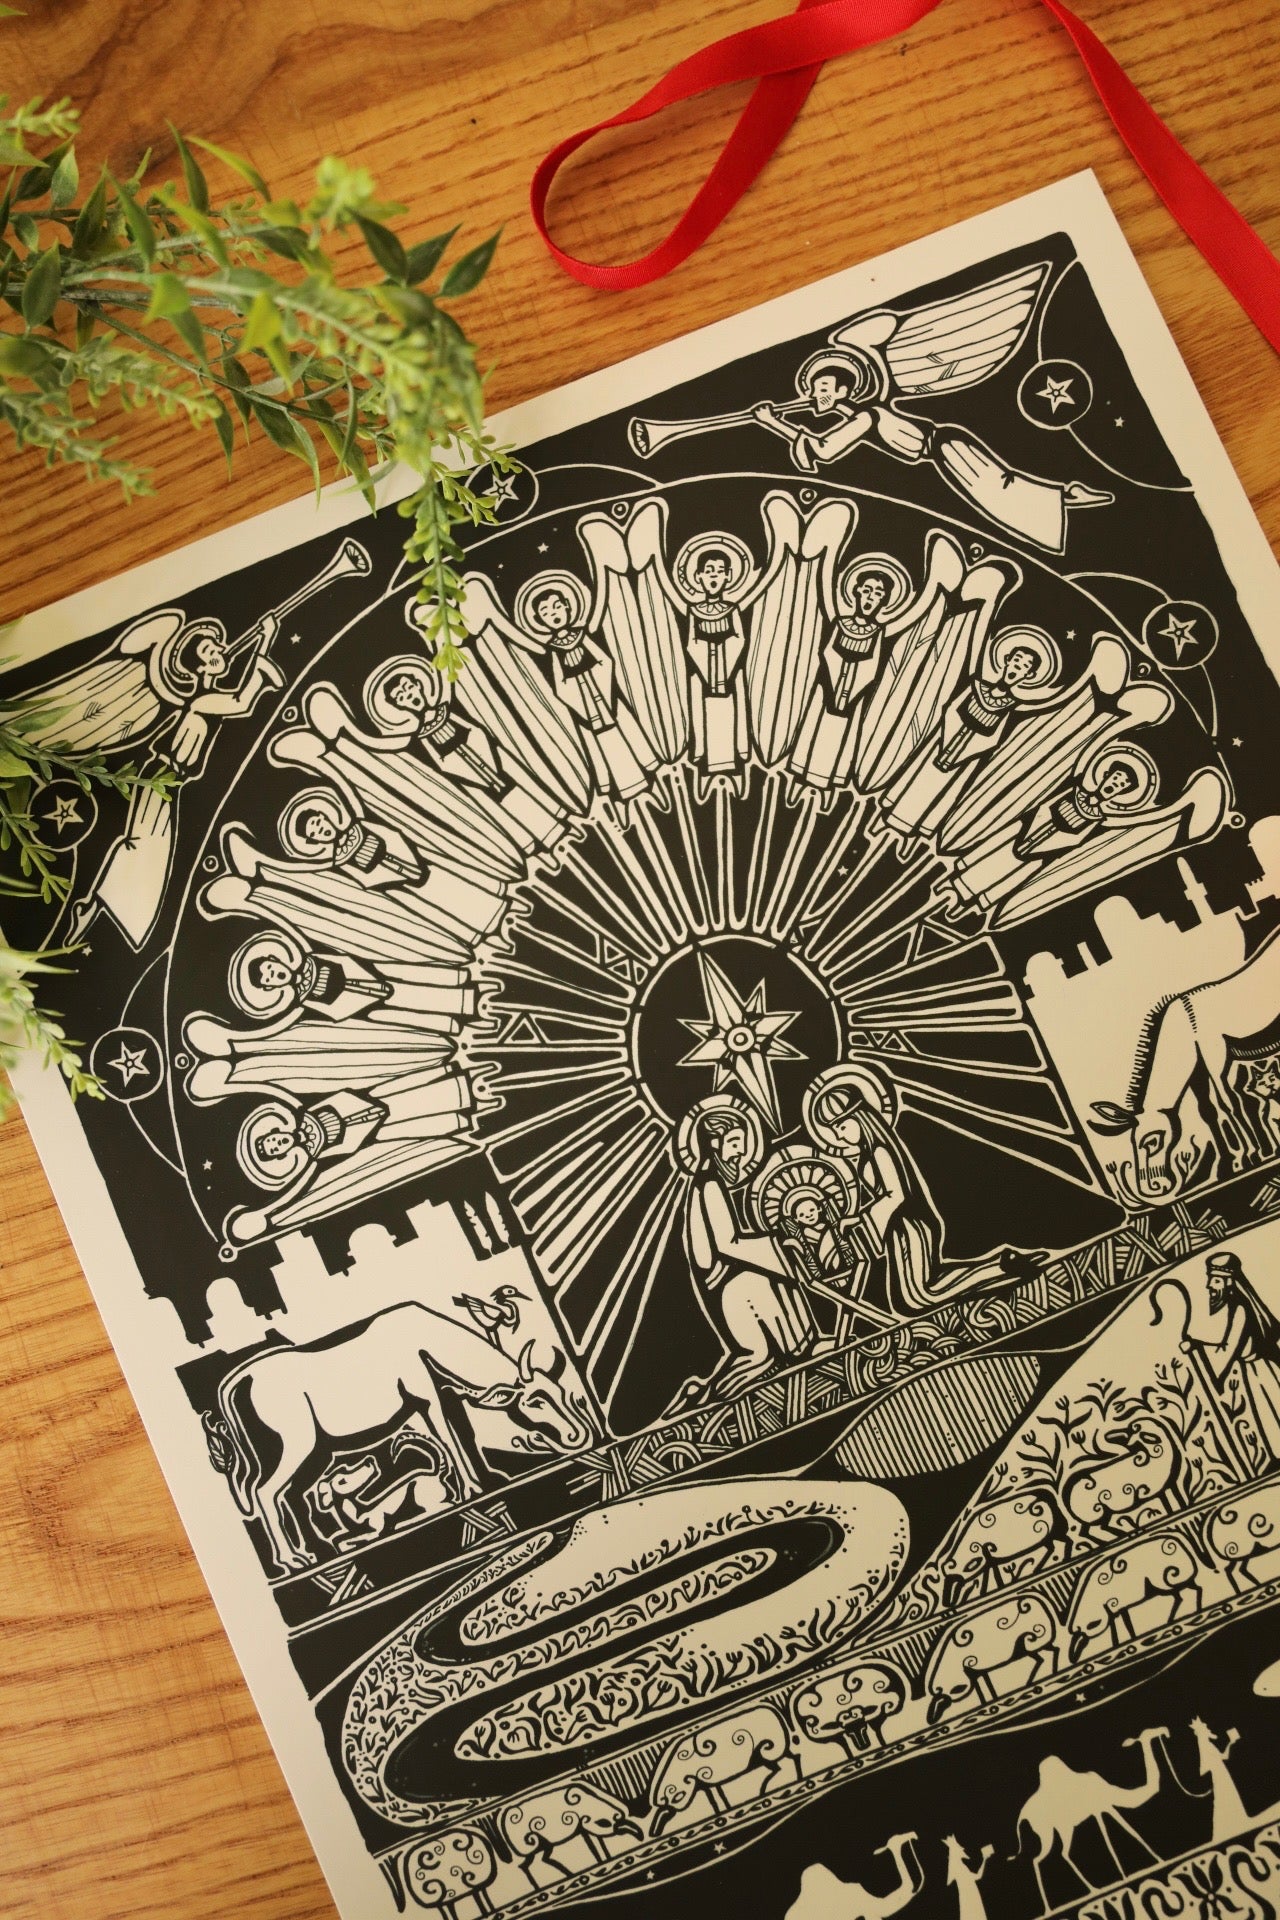 Graphic Print of the Christmas Nativity Scene hand drawn in black and white pen